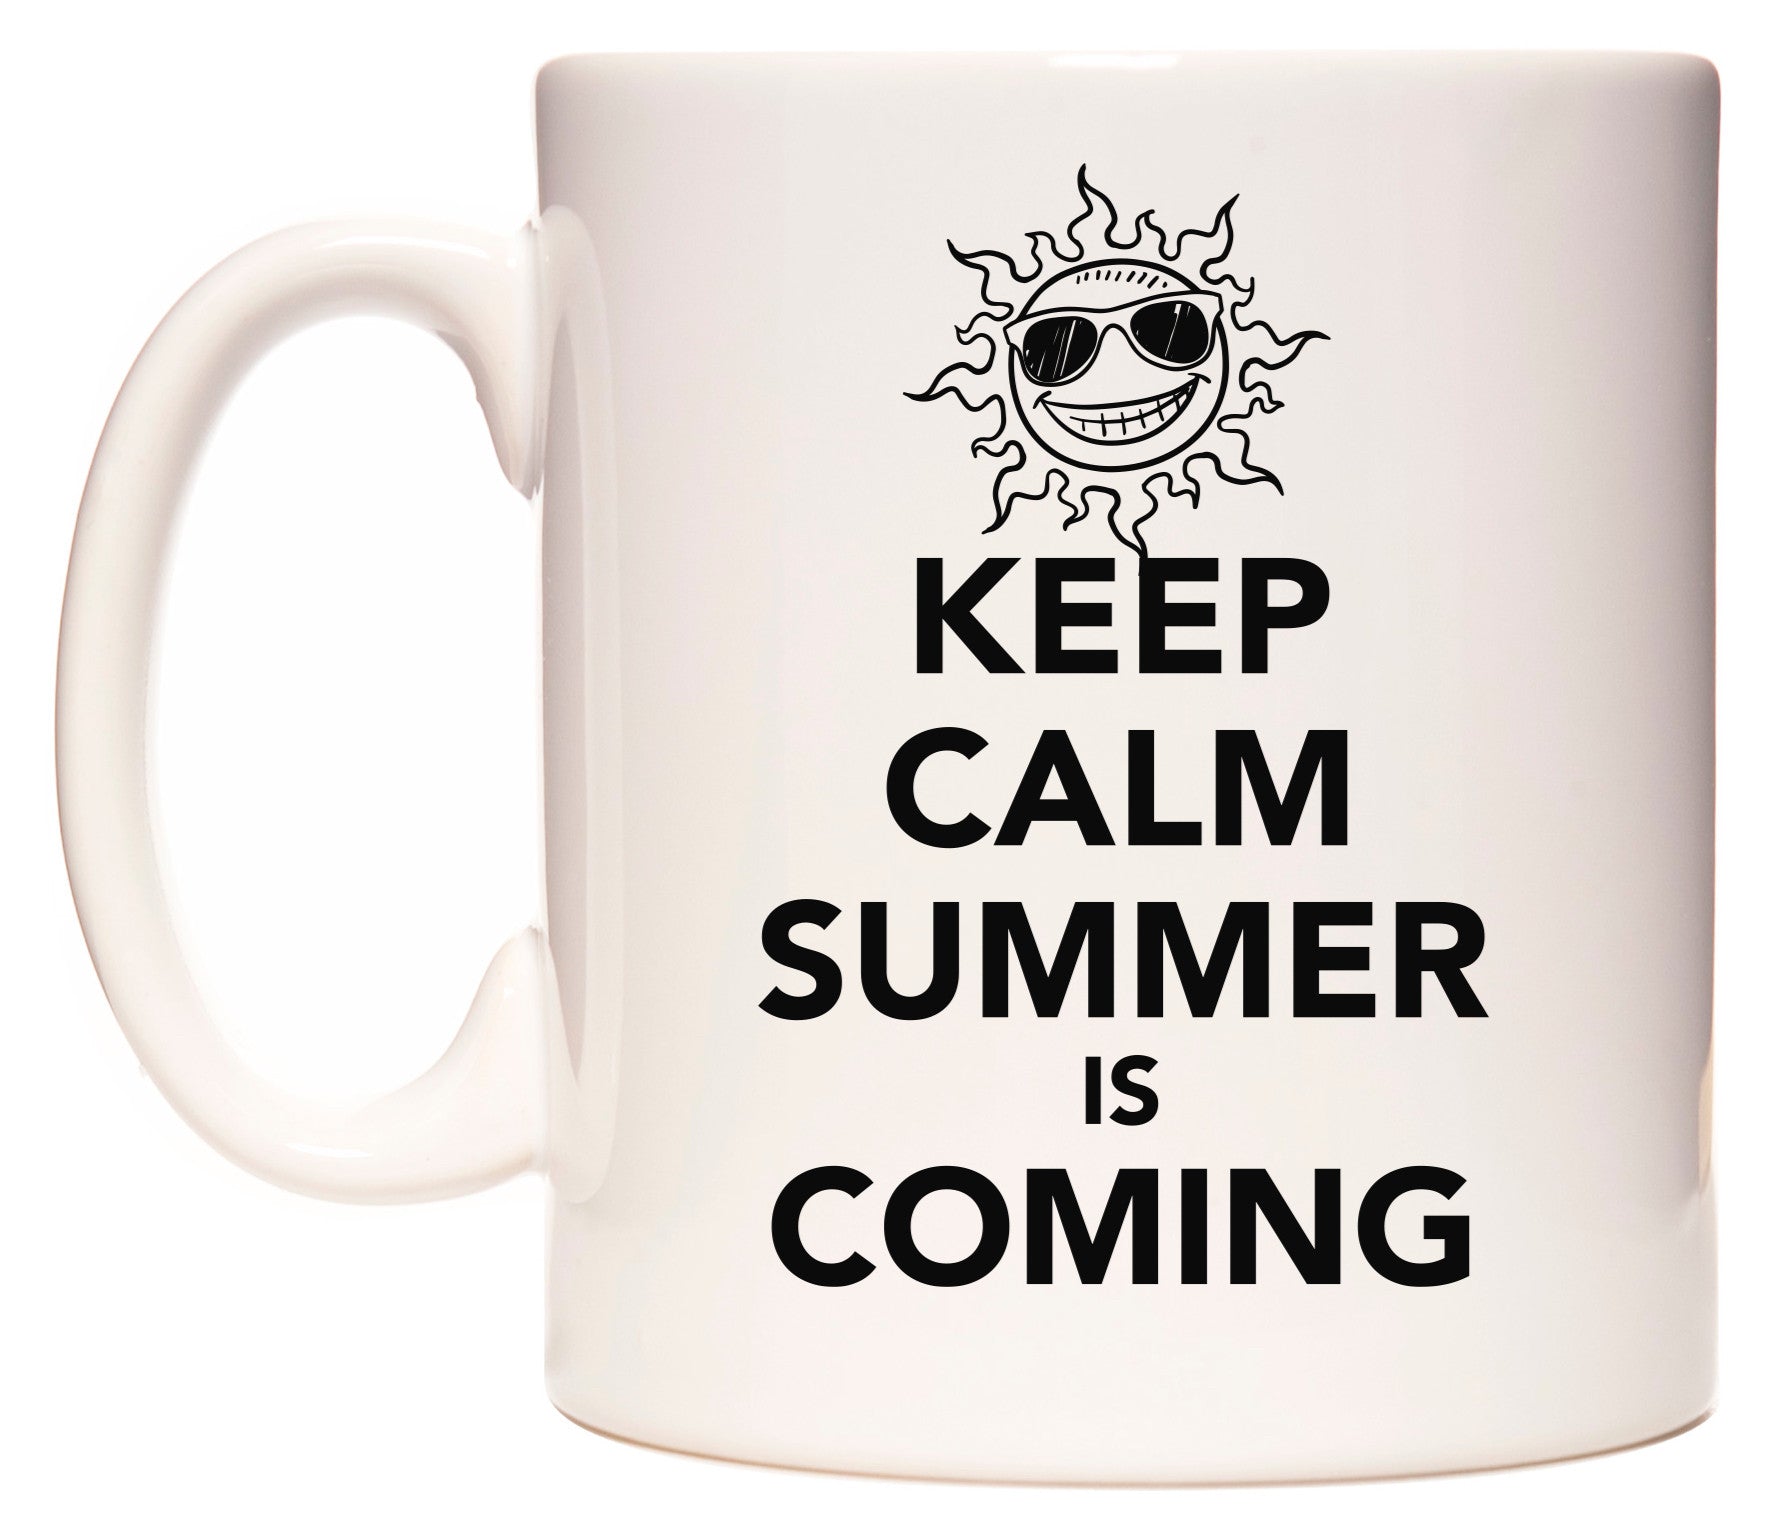 This mug features KEEP CALM SUMMER IS COMING